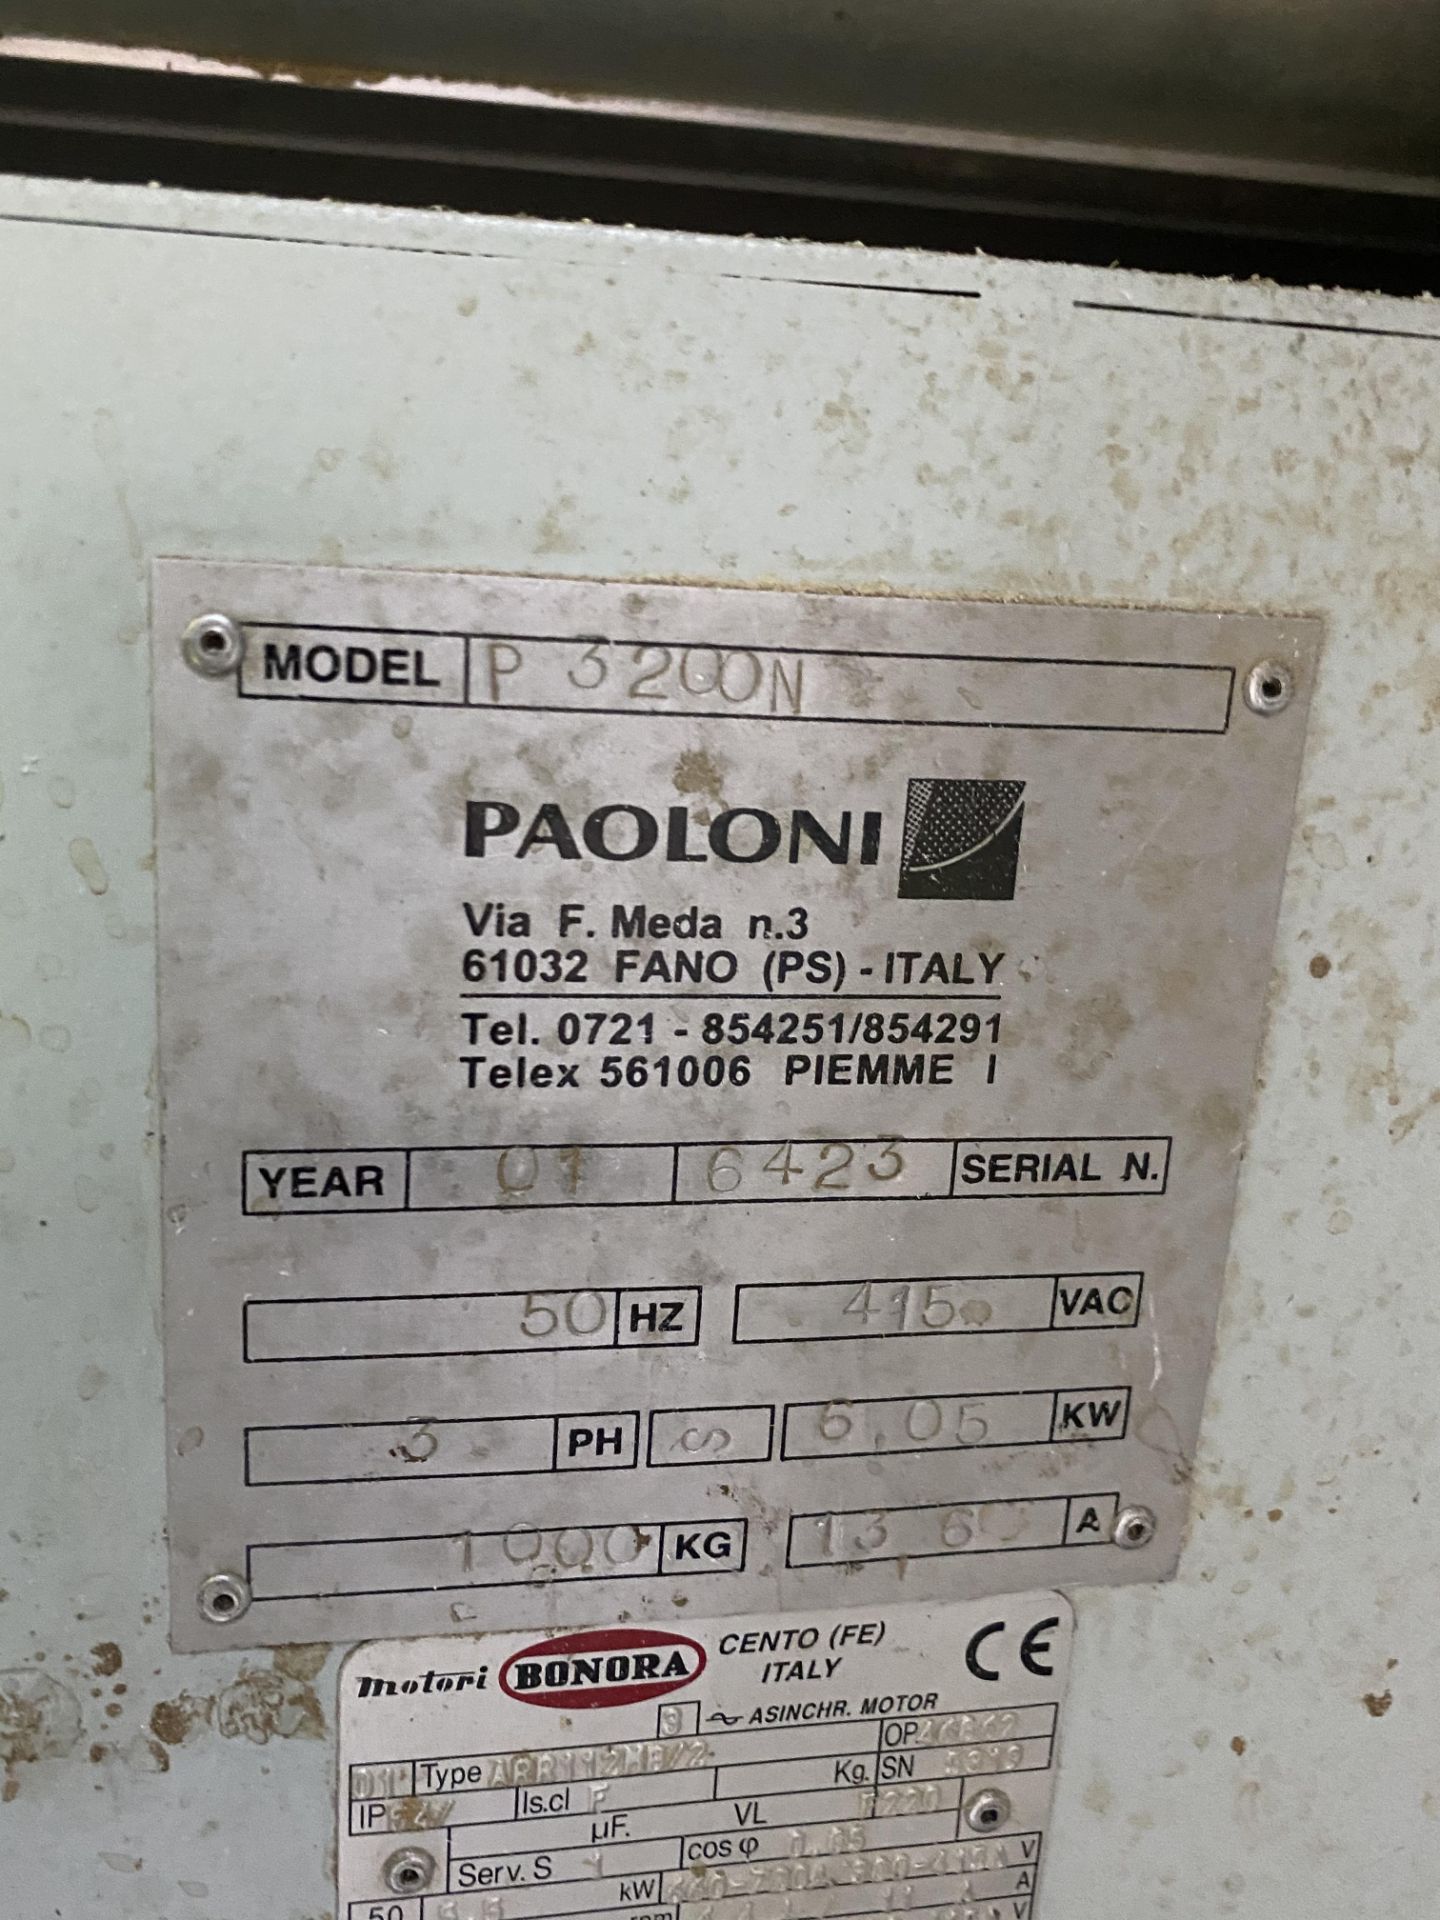 Paoloni P3200m Panel Sizing Sawbench, serial no. 6 - Image 6 of 7